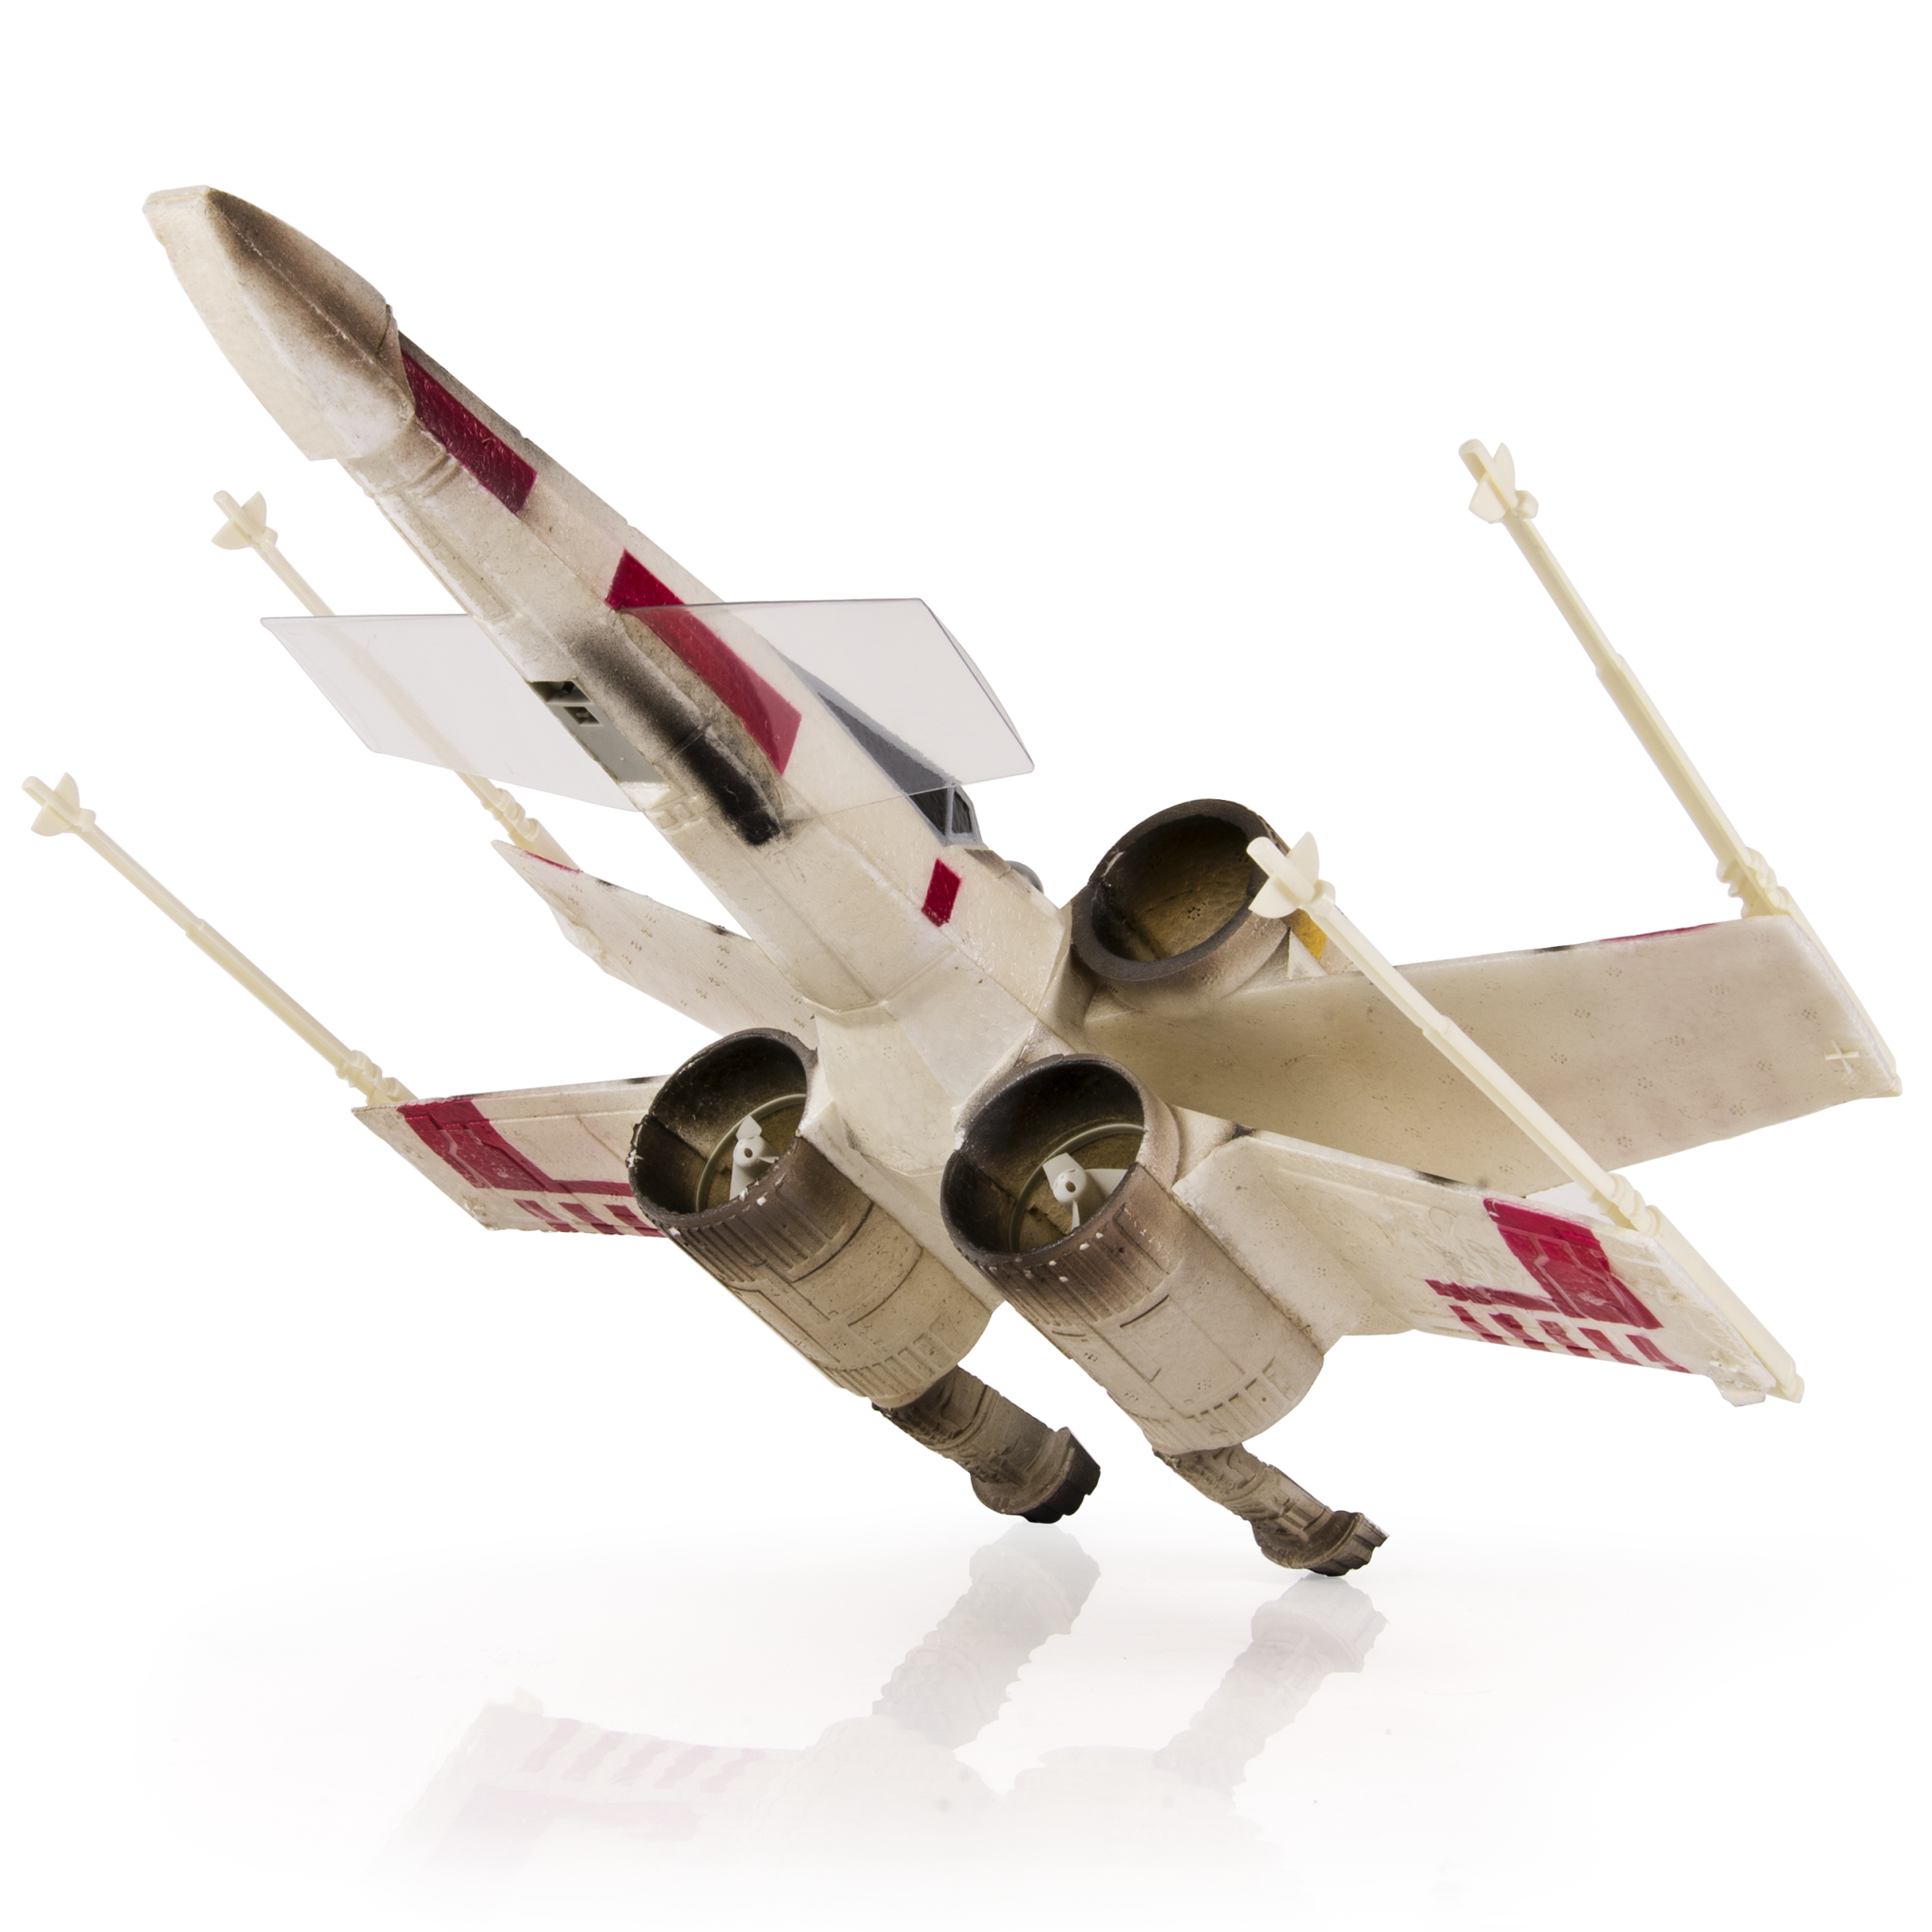 Air Hogs Star Wars Remote Control X-Wing Starfighter - image 4 of 6